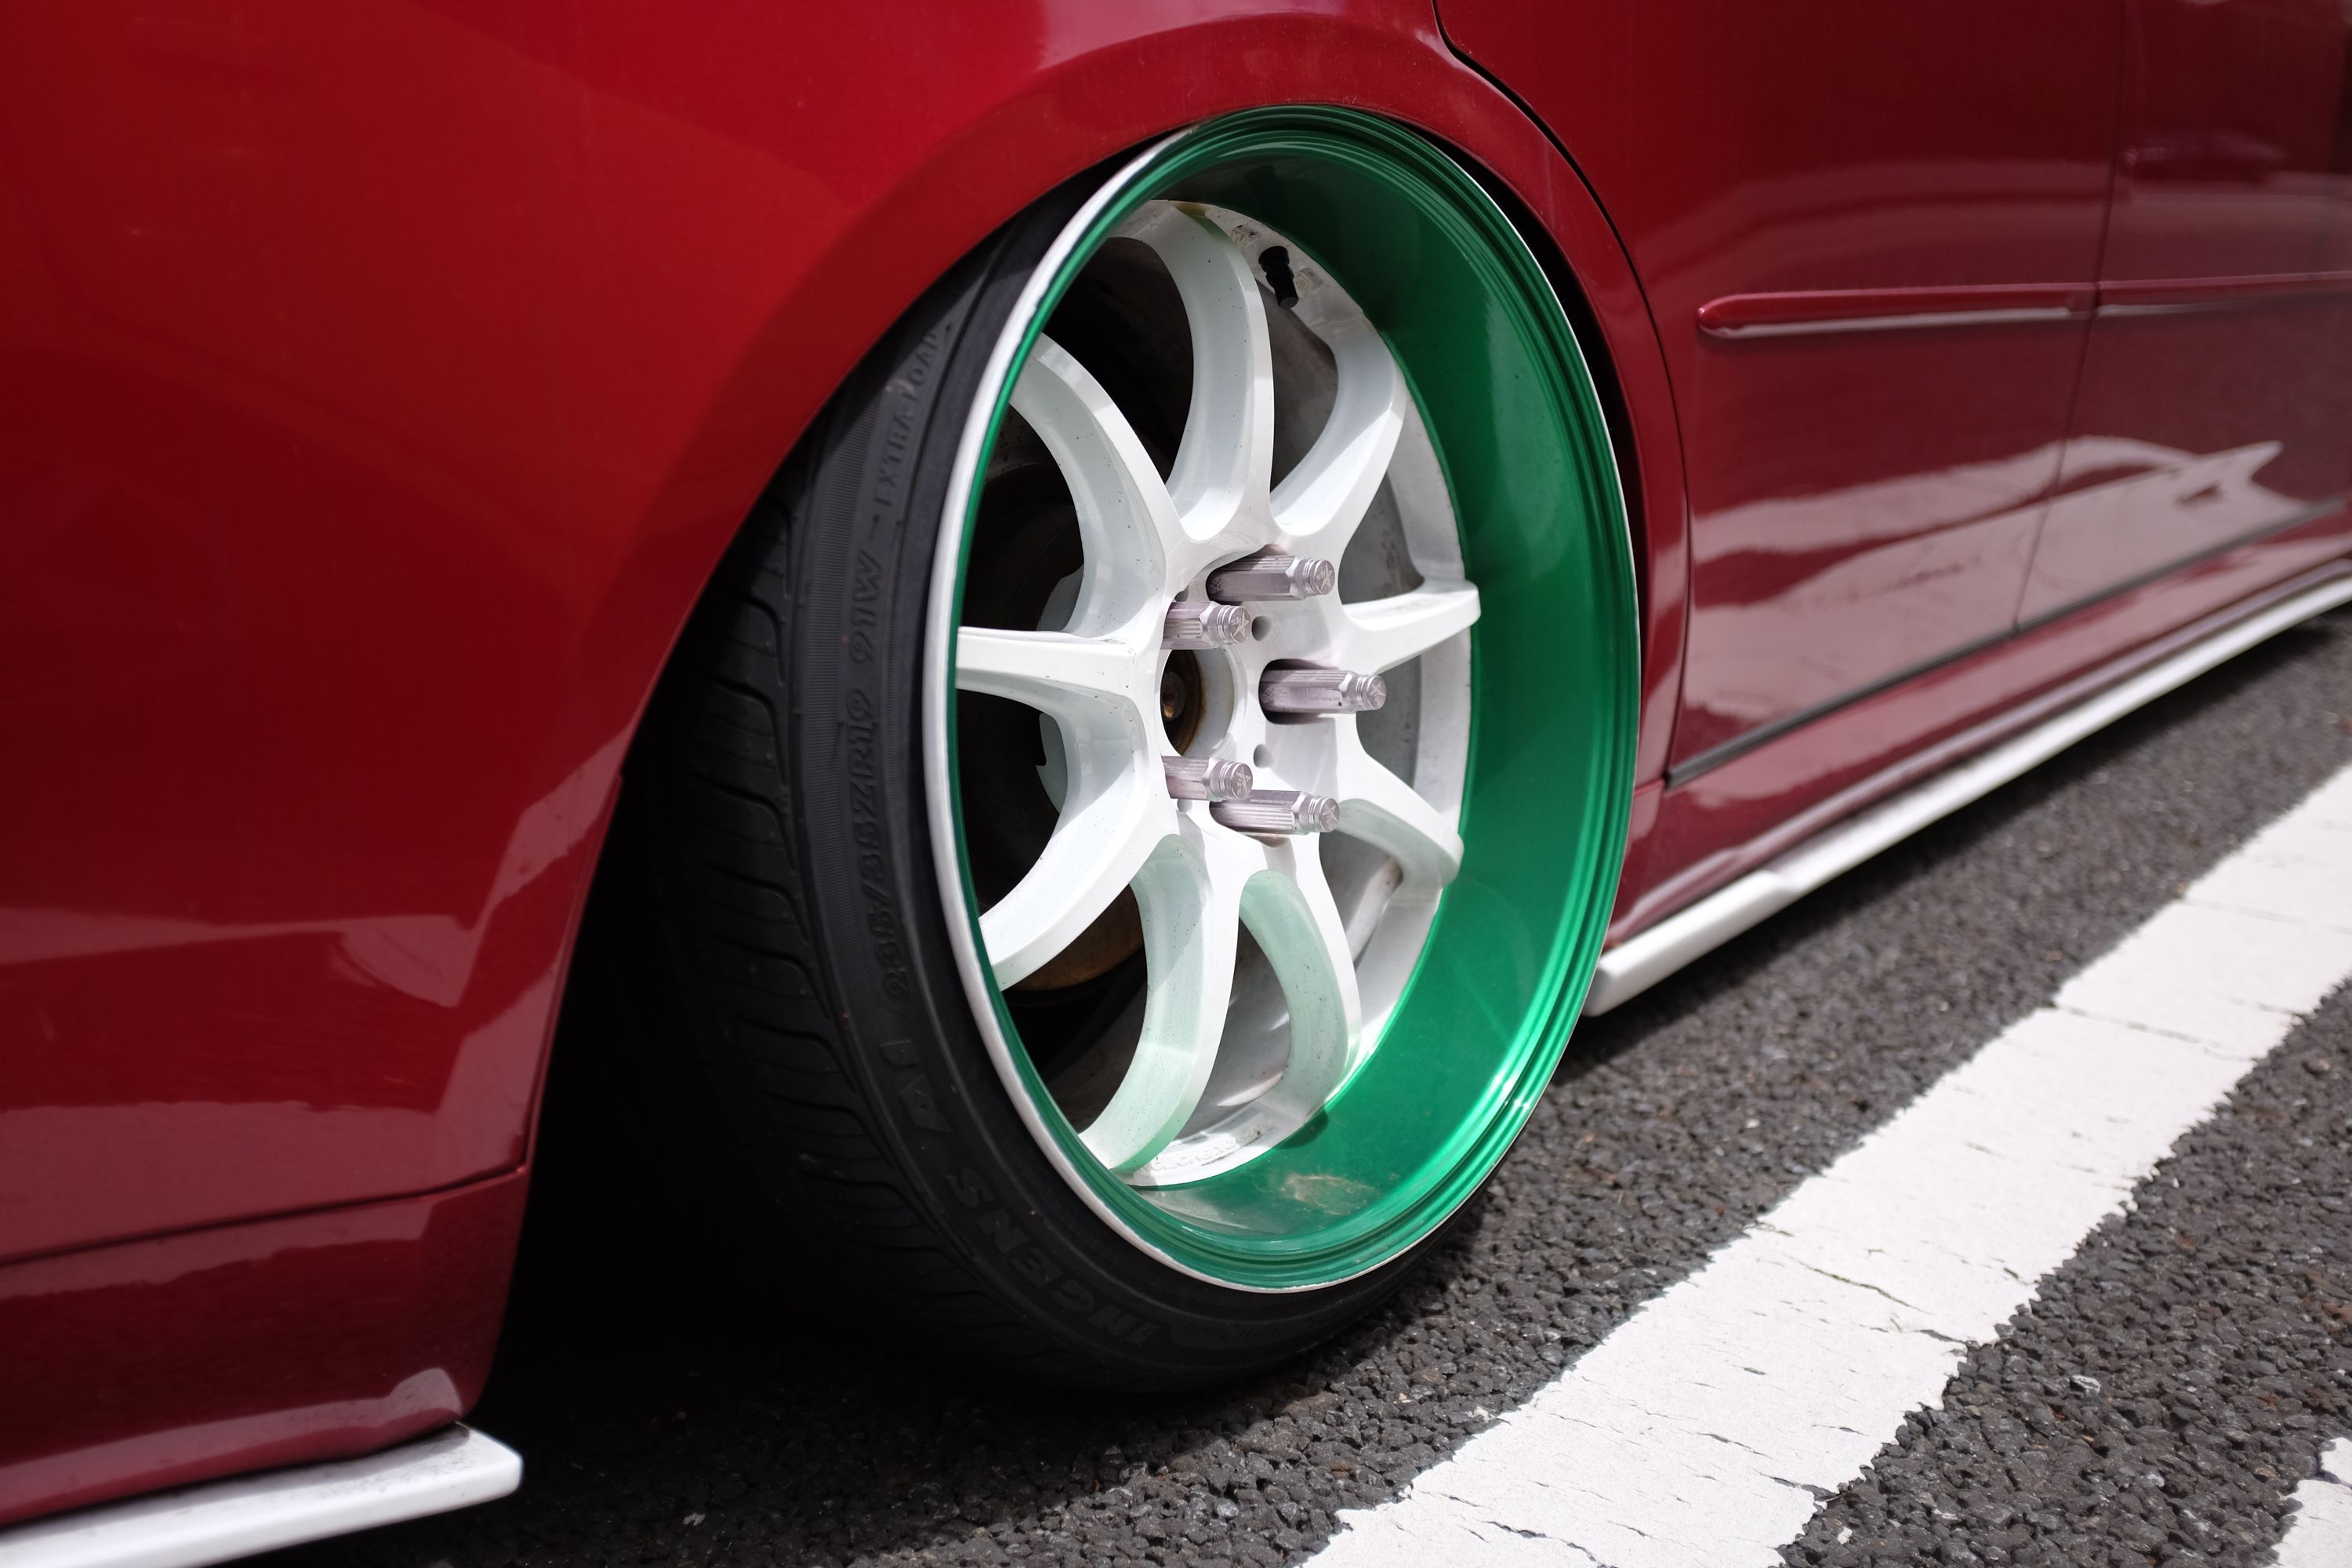 The white wheel of a red car which is lowered almost to the ground, a style called stanceworks.